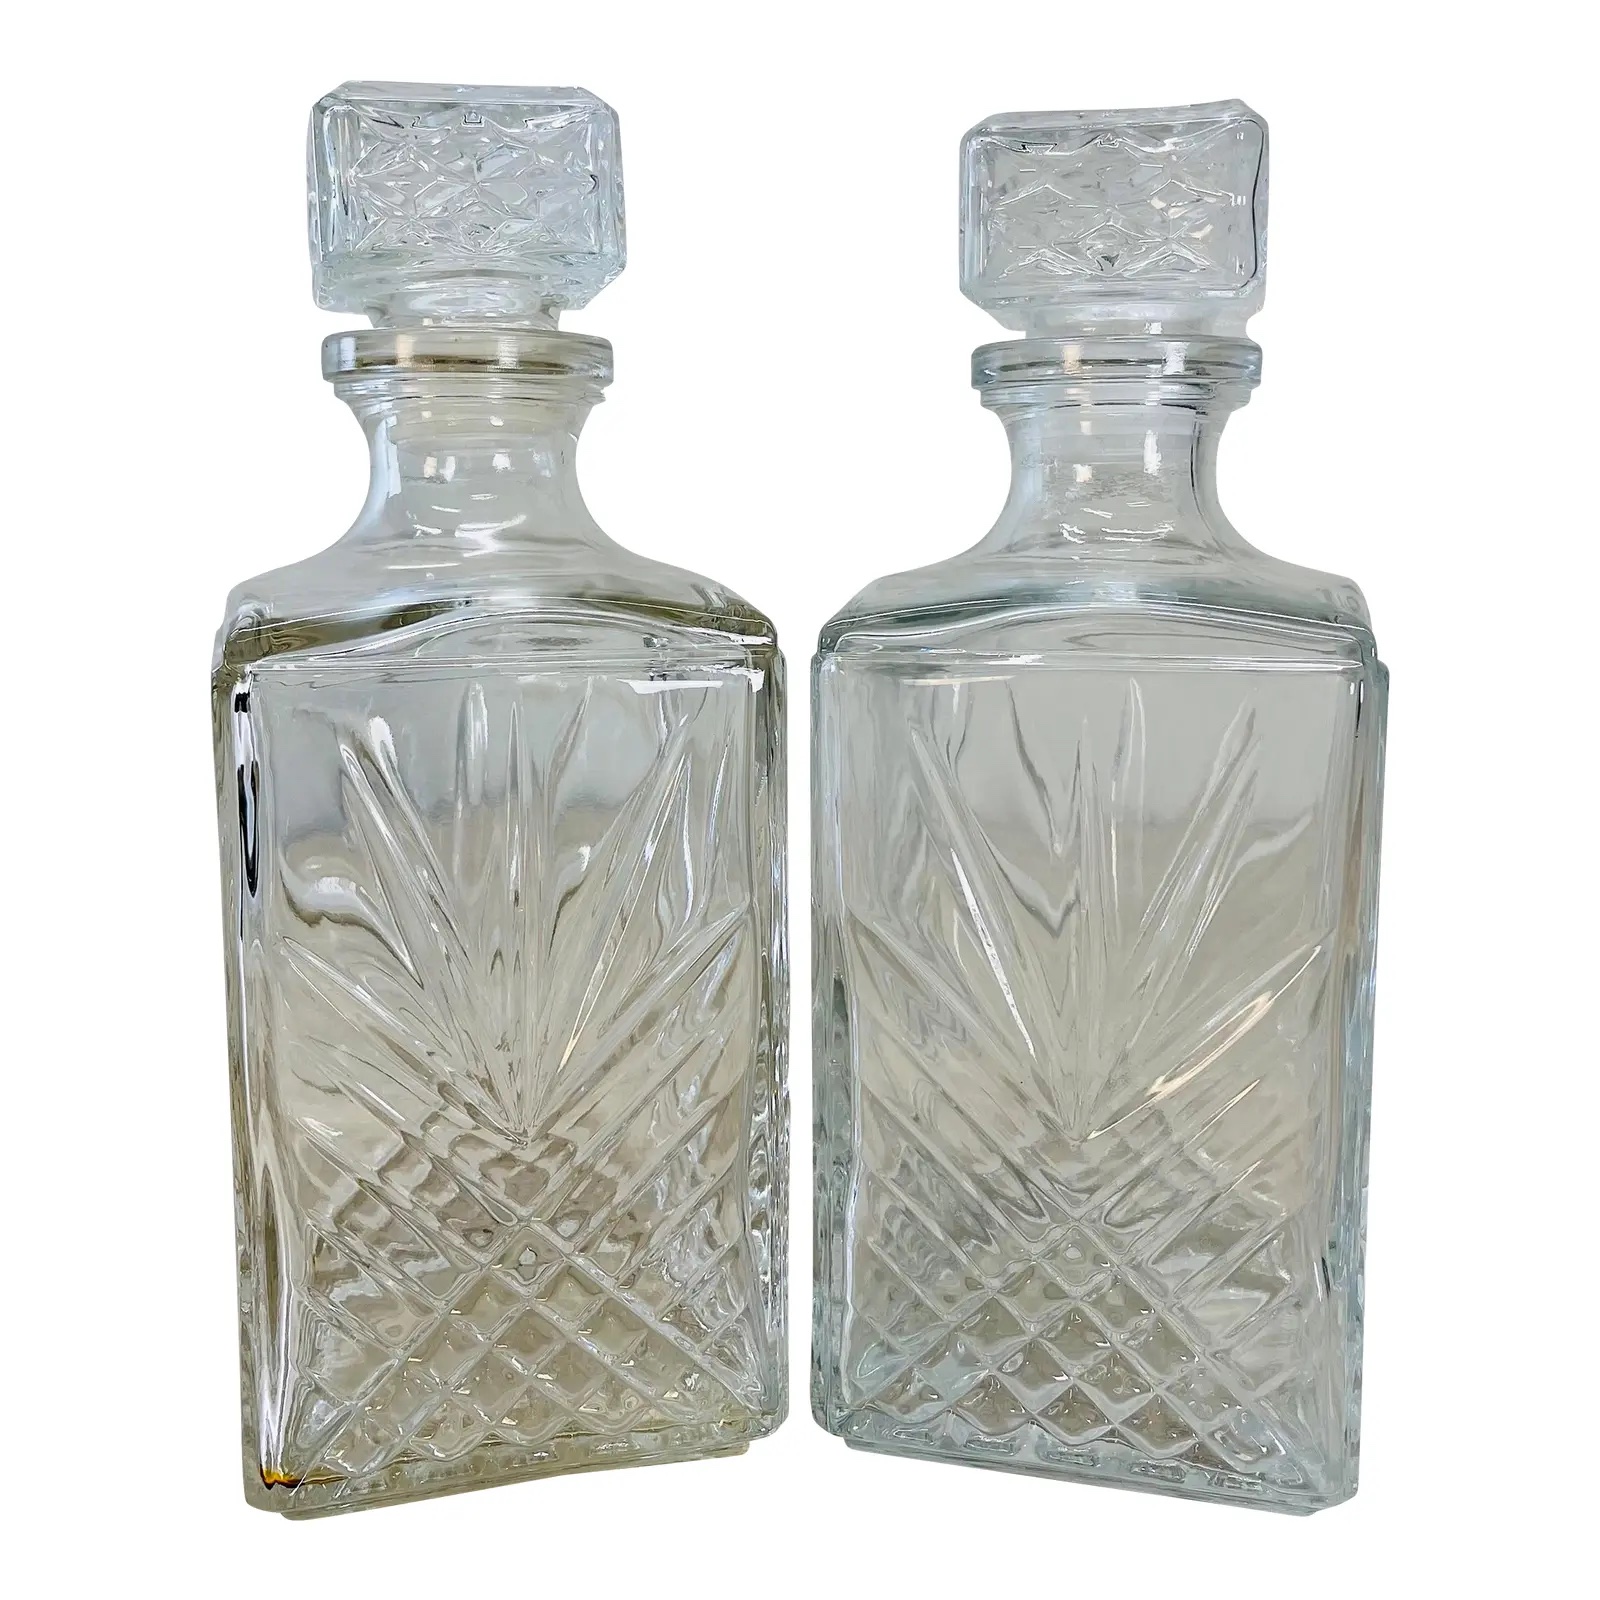 1960s Square Glass Decanters, Pair~P77653148